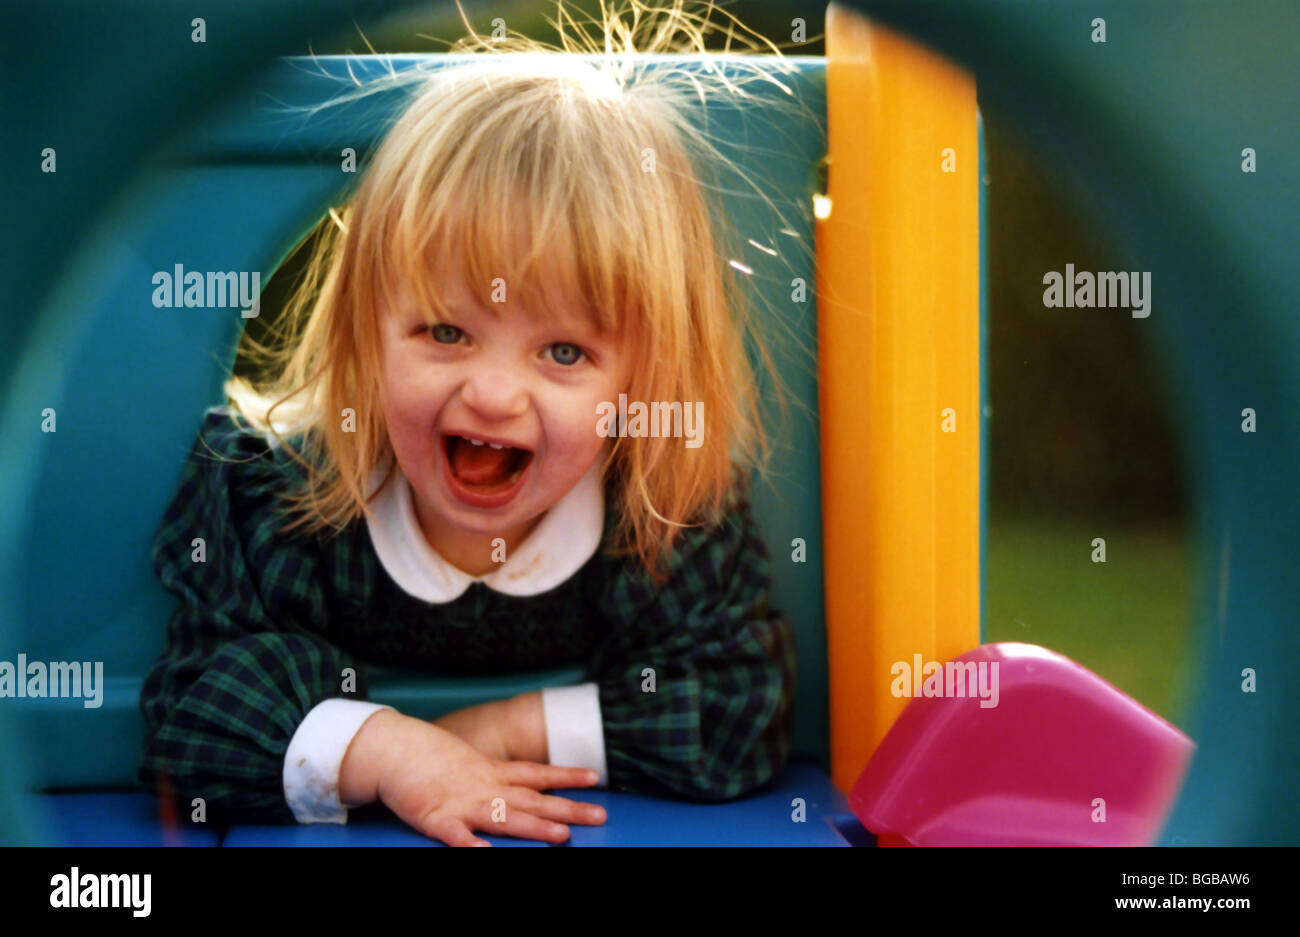 Photograph of happy girl playing nursery play time healthy smile Stock Photo